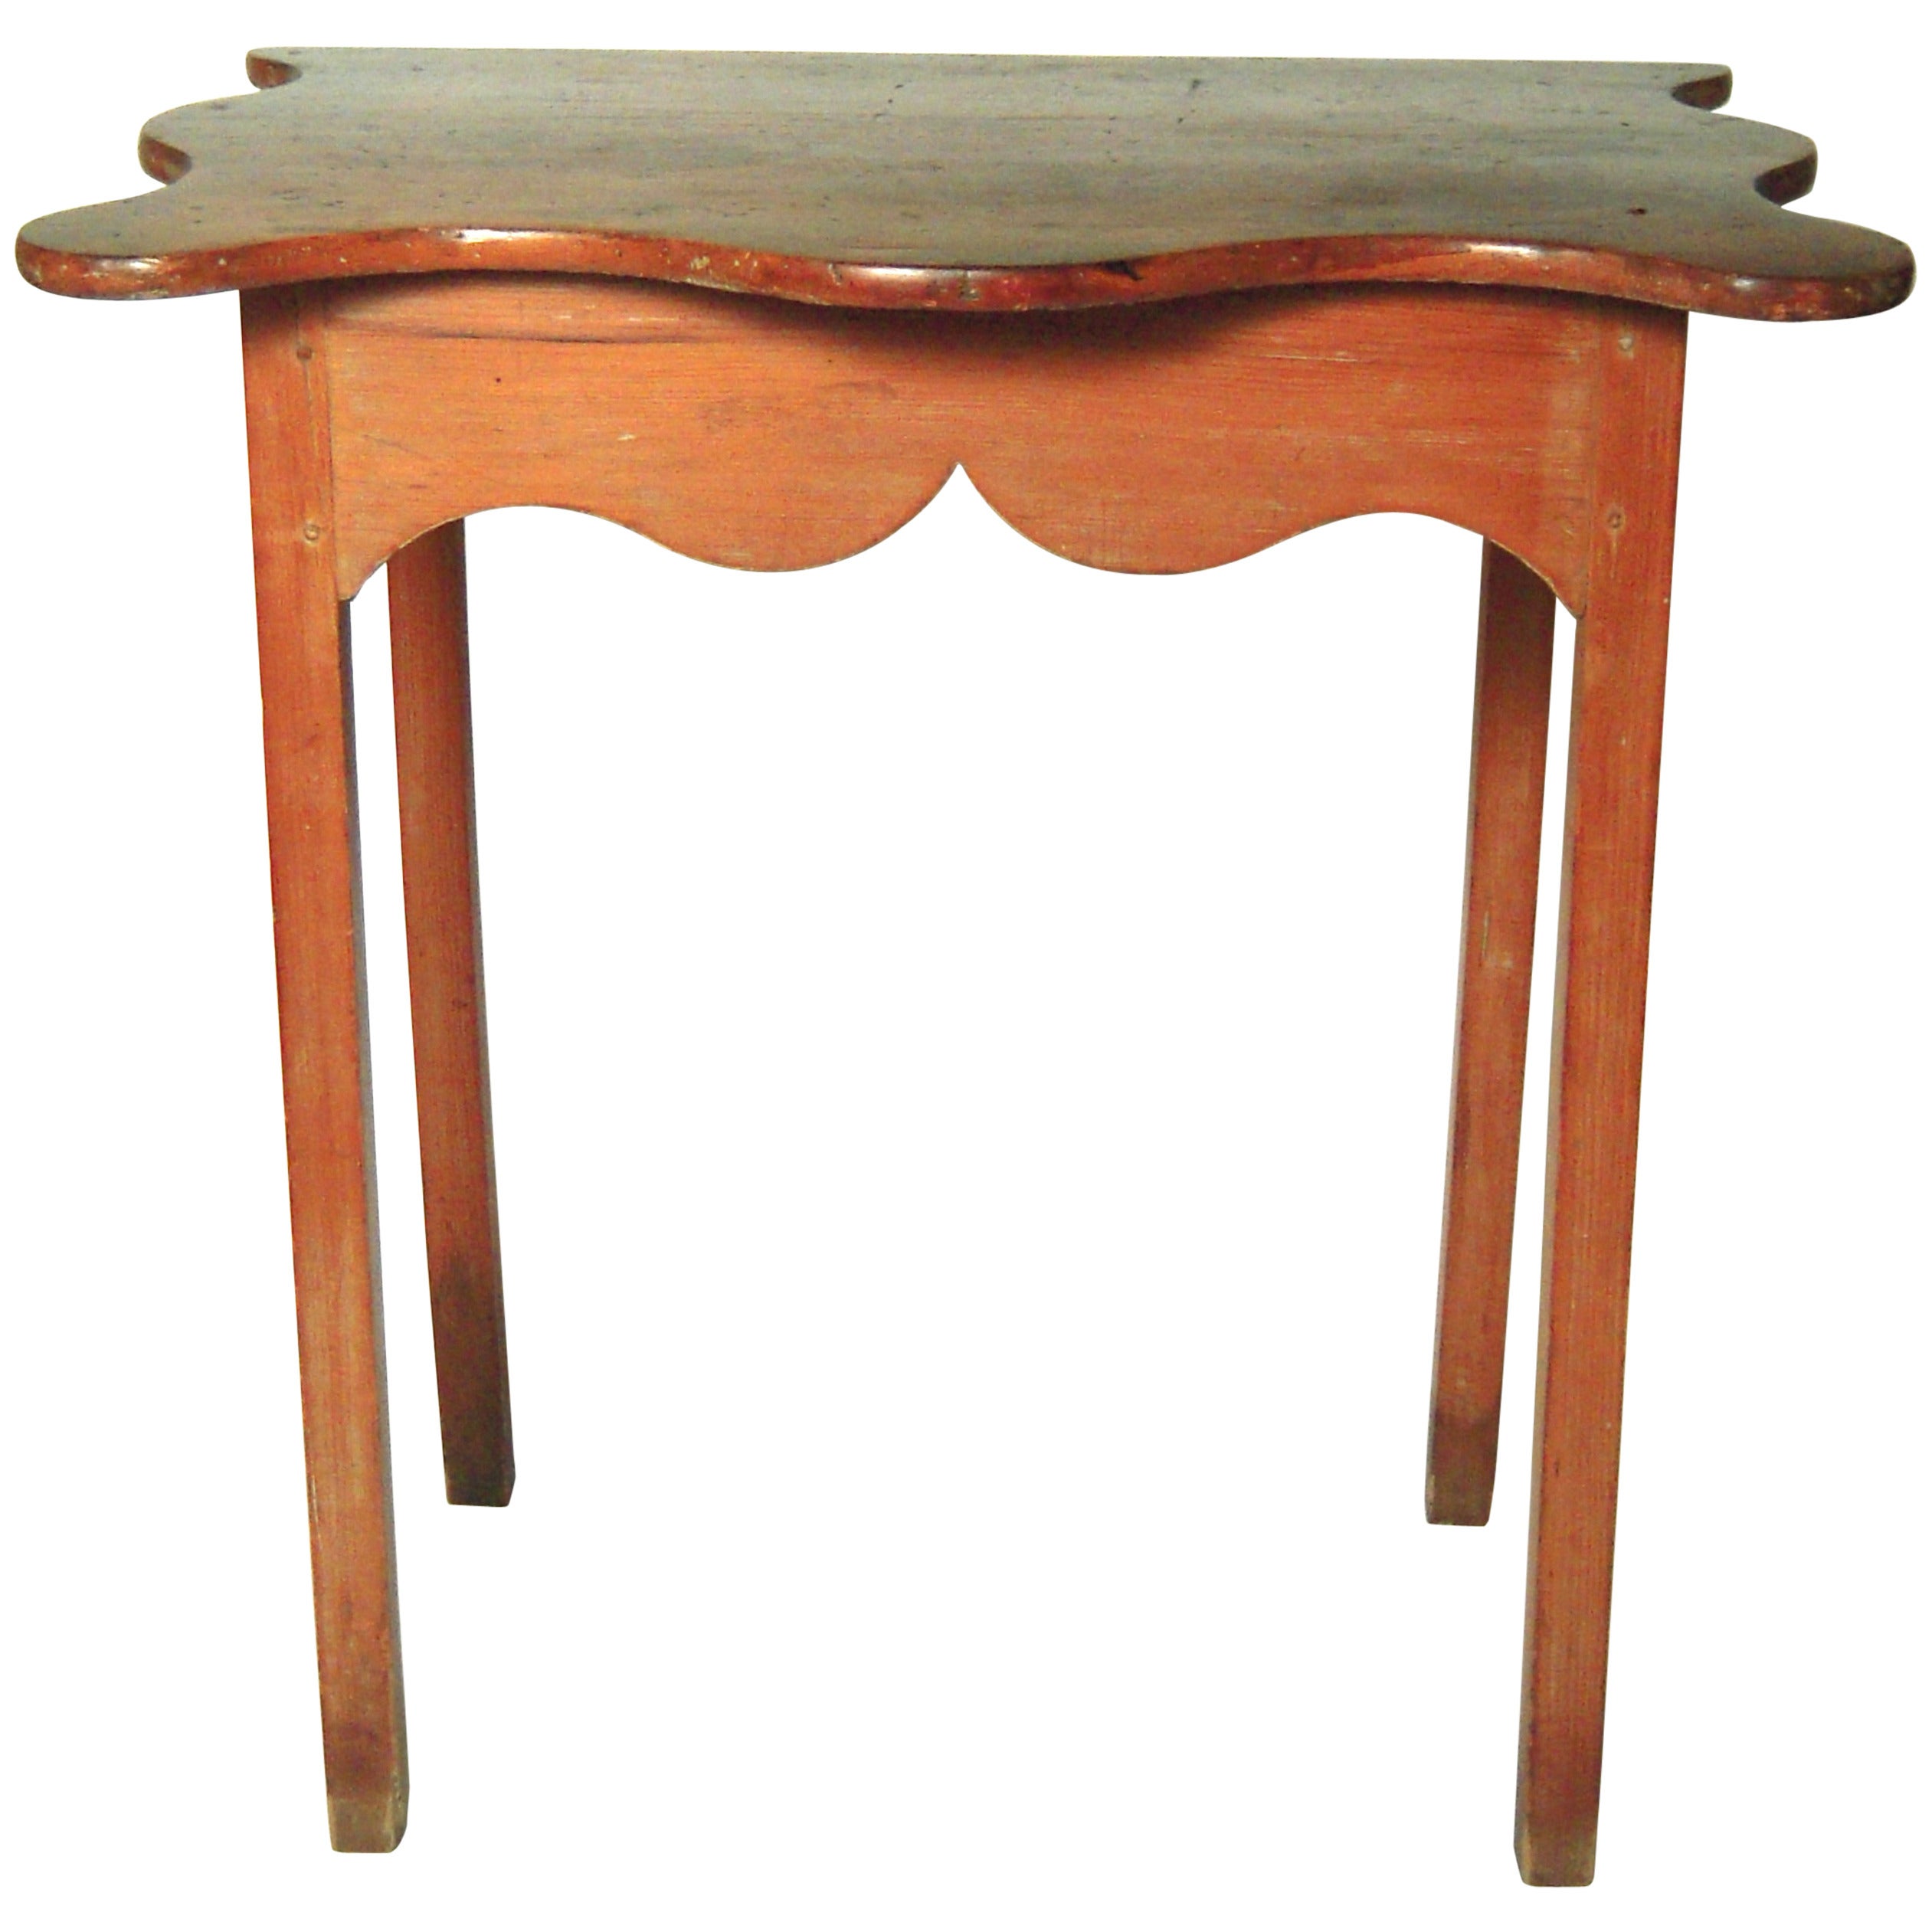 Early American Country Pine Serving Table